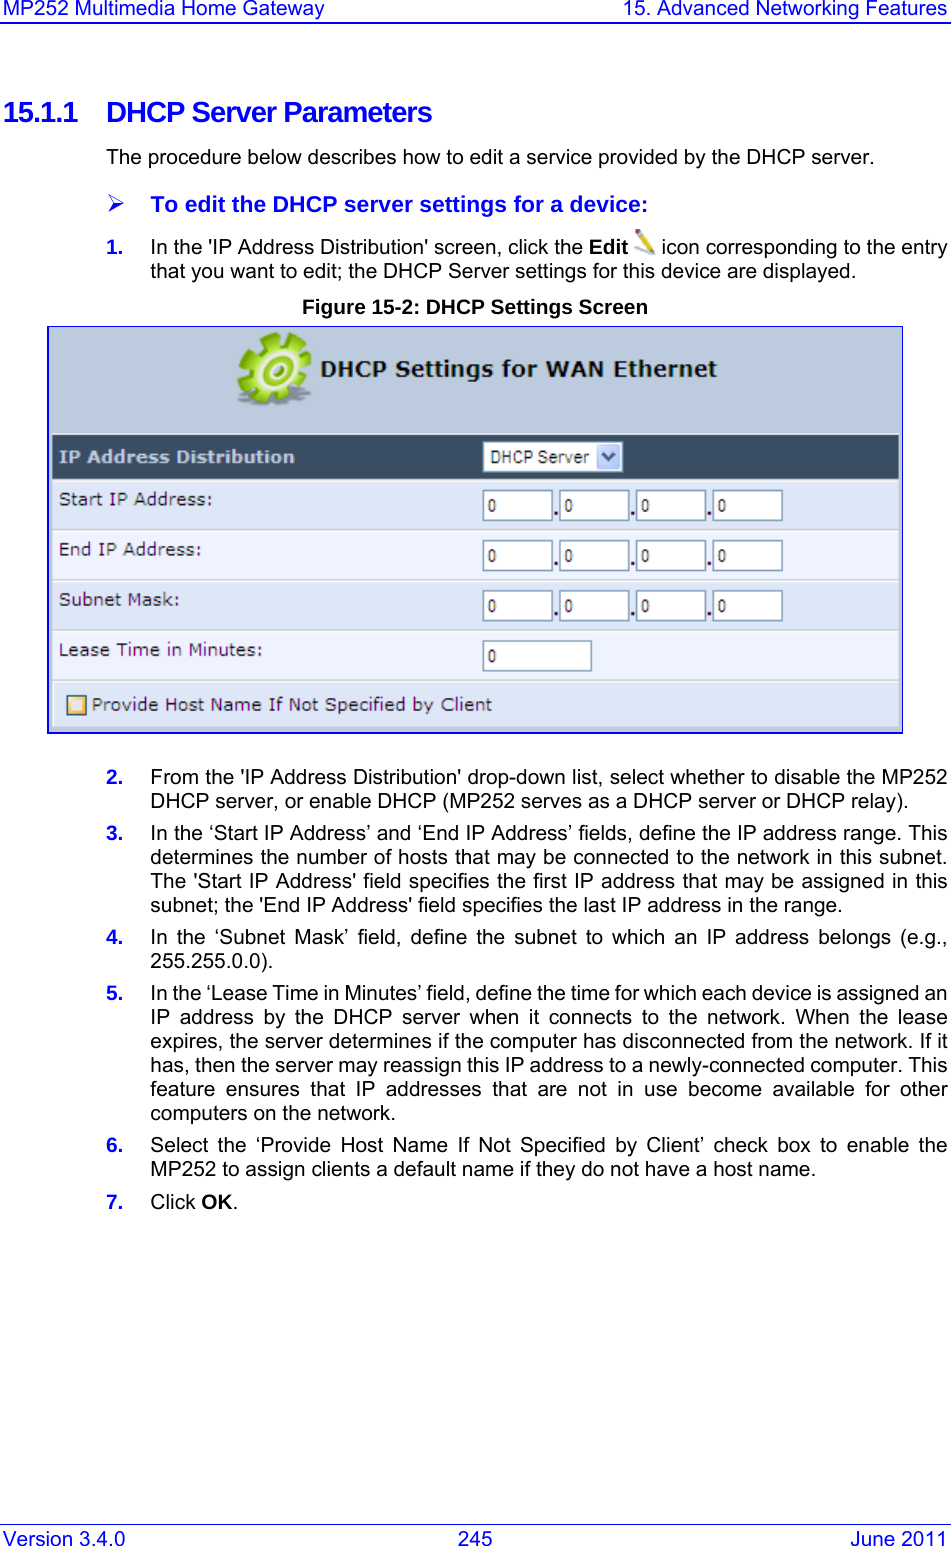 MP252 Multimedia Home Gateway  15. Advanced Networking Features Version 3.4.0  245  June 2011 15.1.1  DHCP Server Parameters The procedure below describes how to edit a service provided by the DHCP server. ¾ To edit the DHCP server settings for a device: 1.  In the &apos;IP Address Distribution&apos; screen, click the Edit  icon corresponding to the entry that you want to edit; the DHCP Server settings for this device are displayed.  Figure 15-2: DHCP Settings Screen  2.  From the &apos;IP Address Distribution&apos; drop-down list, select whether to disable the MP252 DHCP server, or enable DHCP (MP252 serves as a DHCP server or DHCP relay). 3.  In the ‘Start IP Address’ and ‘End IP Address’ fields, define the IP address range. This determines the number of hosts that may be connected to the network in this subnet. The &apos;Start IP Address&apos; field specifies the first IP address that may be assigned in this subnet; the &apos;End IP Address&apos; field specifies the last IP address in the range. 4.  In the ‘Subnet Mask’ field, define the subnet to which an IP address belongs (e.g., 255.255.0.0). 5.  In the ‘Lease Time in Minutes’ field, define the time for which each device is assigned an IP address by the DHCP server when it connects to the network. When the lease expires, the server determines if the computer has disconnected from the network. If it has, then the server may reassign this IP address to a newly-connected computer. This feature ensures that IP addresses that are not in use become available for other computers on the network. 6.  Select the ‘Provide Host Name If Not Specified by Client’ check box to enable the MP252 to assign clients a default name if they do not have a host name. 7.  Click OK.  